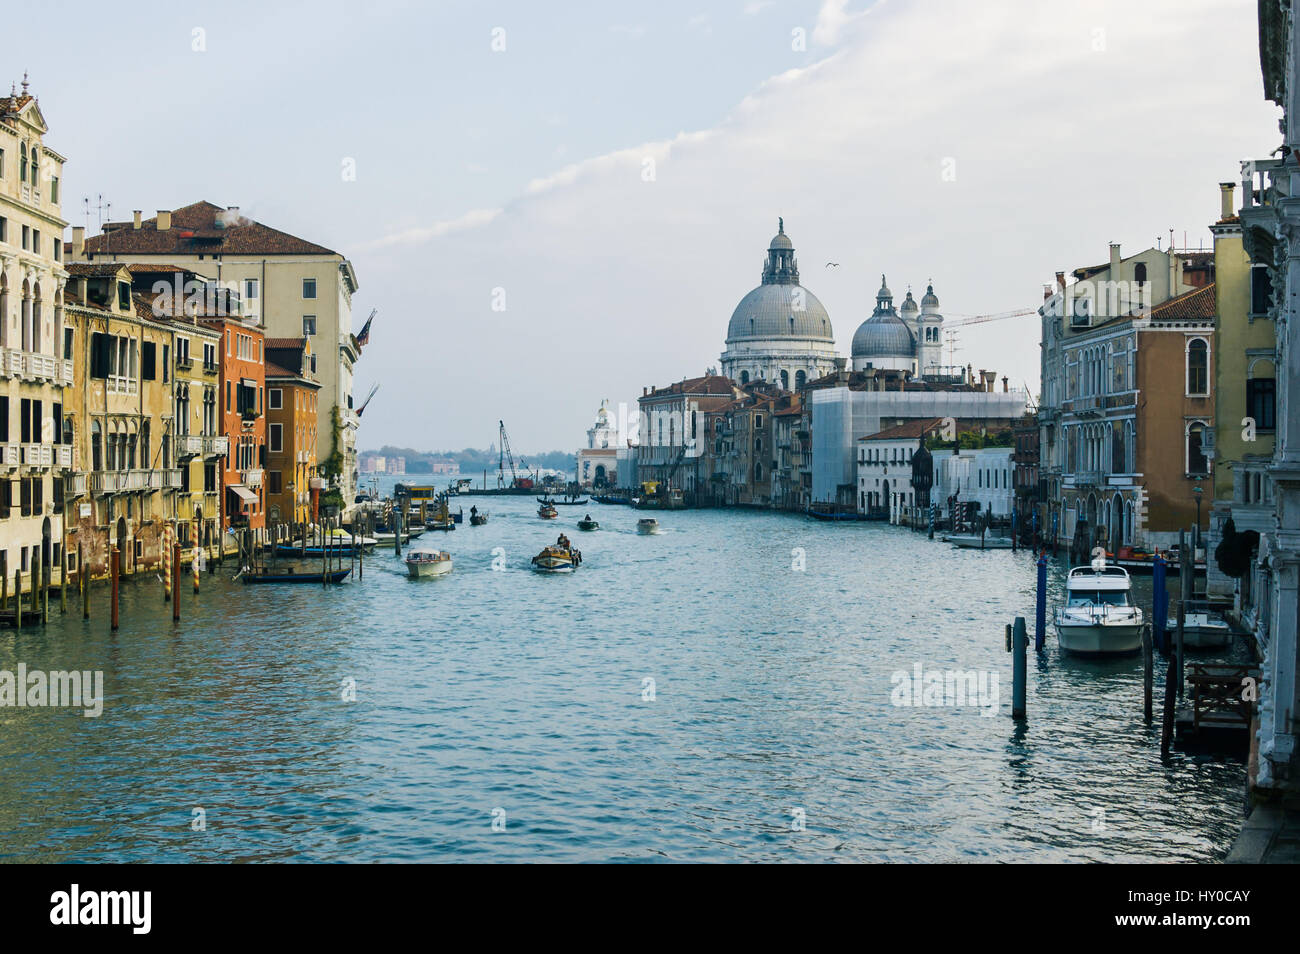 View of the Grand Canal in Venice, Italy Stock Photo